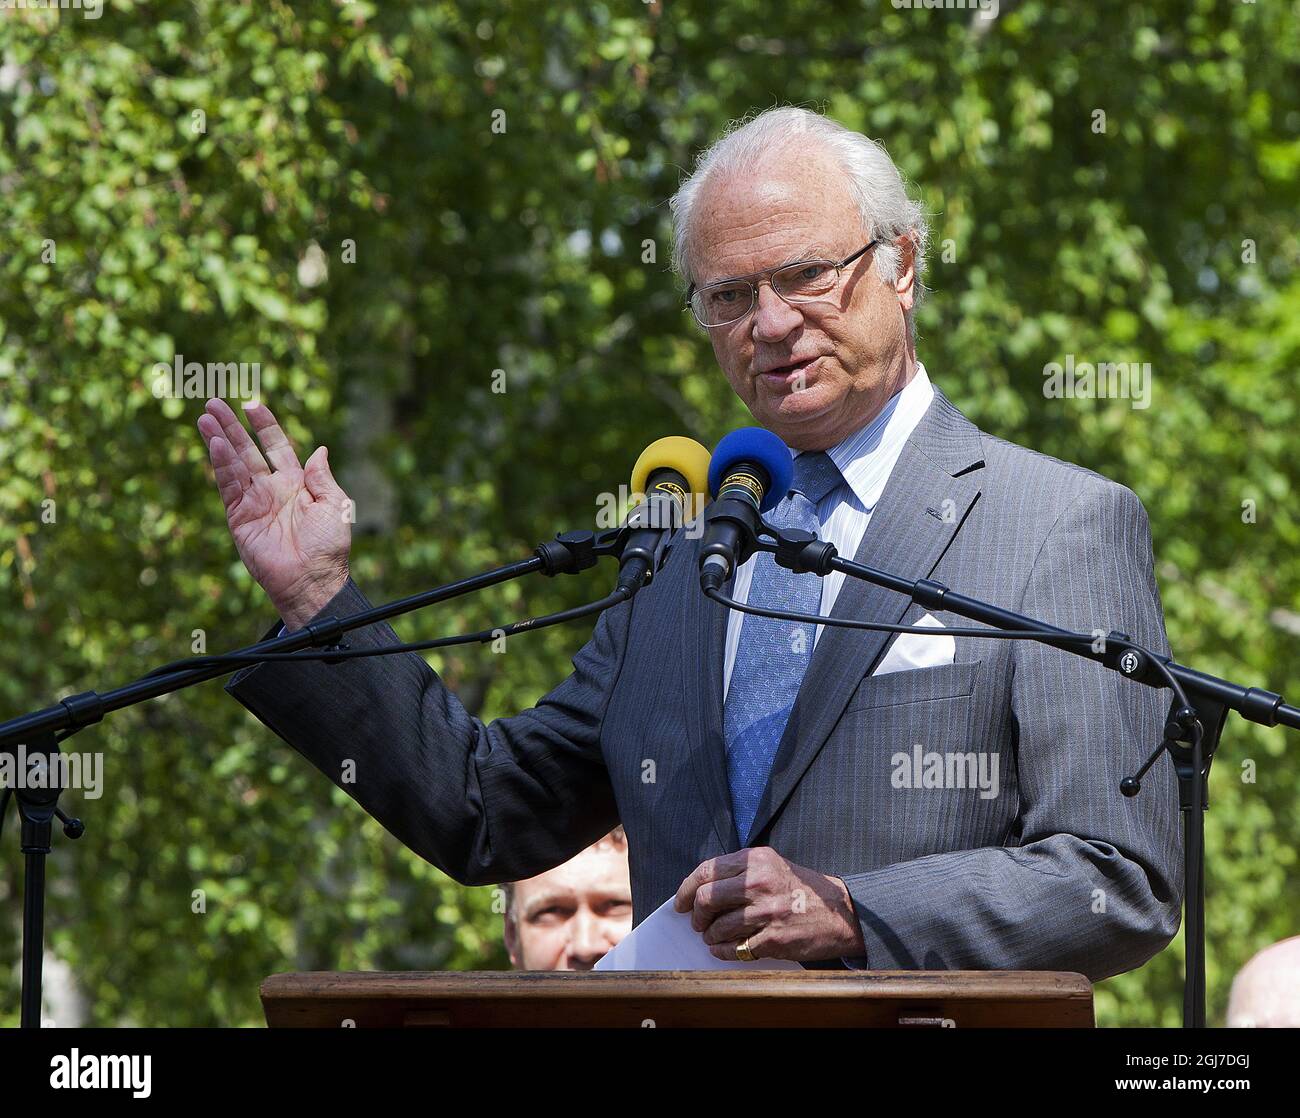 OSTERBYBRUK 2012-06-13 King Carl Gustaf of Sweden is seen during his speech at the inauguration of the Dannemora Mine in Osterbybruk, Sweden 13 jun 2012. Foto: Gunnar Seijbold / XP / SCANPIX / kod 7132 ** OUT SWEDEN OUT ** Stock Photo